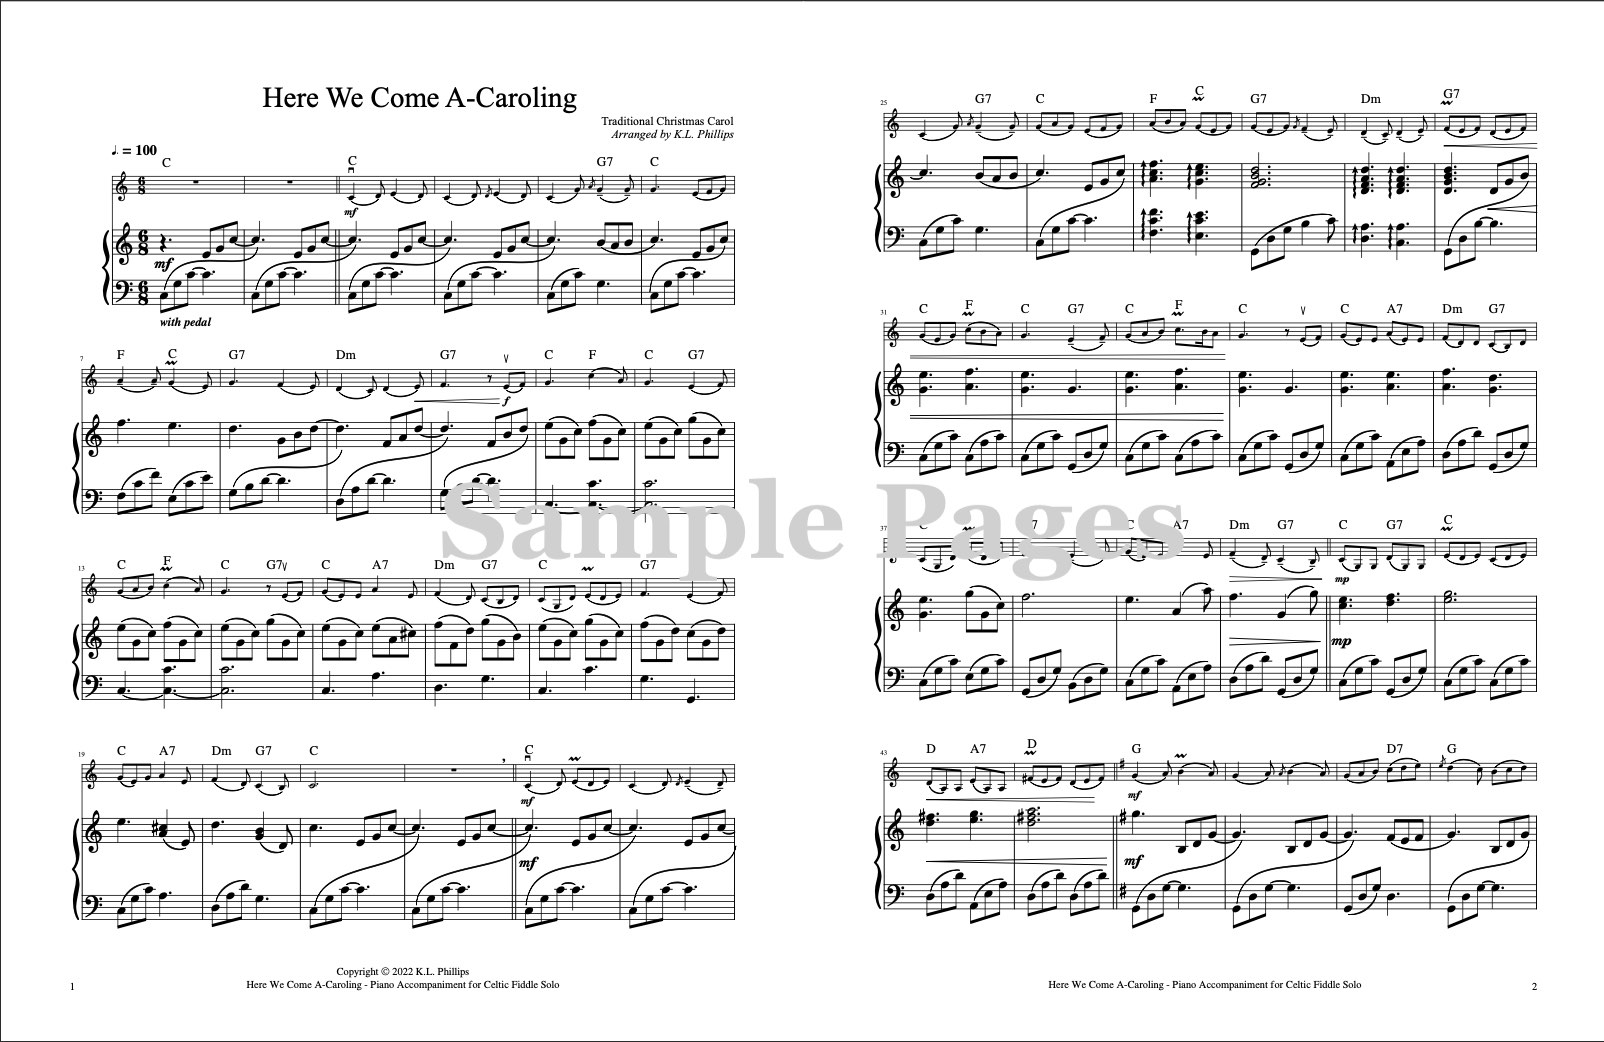 Here We Come A-Caroling – Violin Solo in a Celtic Fiddle Style (with Piano Accompaniment)